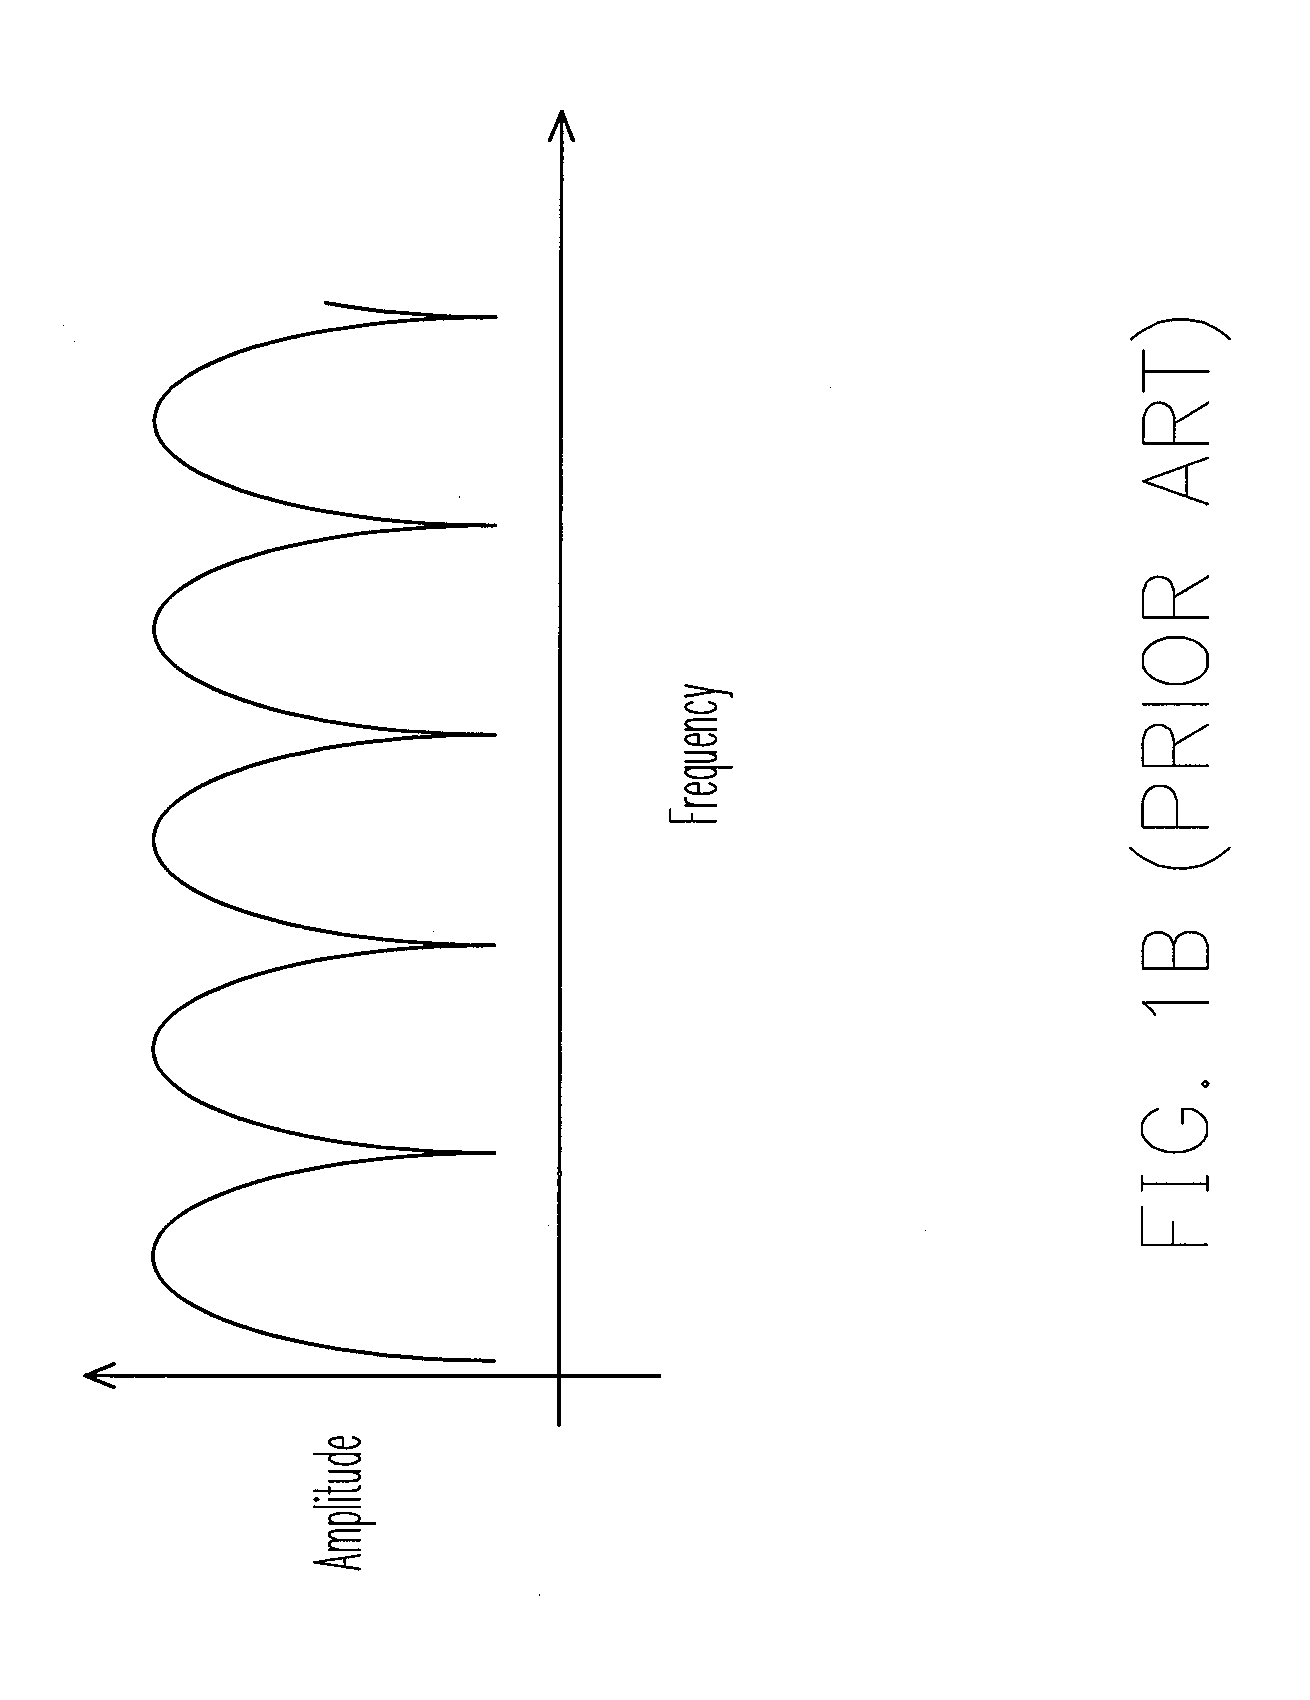 Signal processing circuit and signal processing method for removing co-channel interference